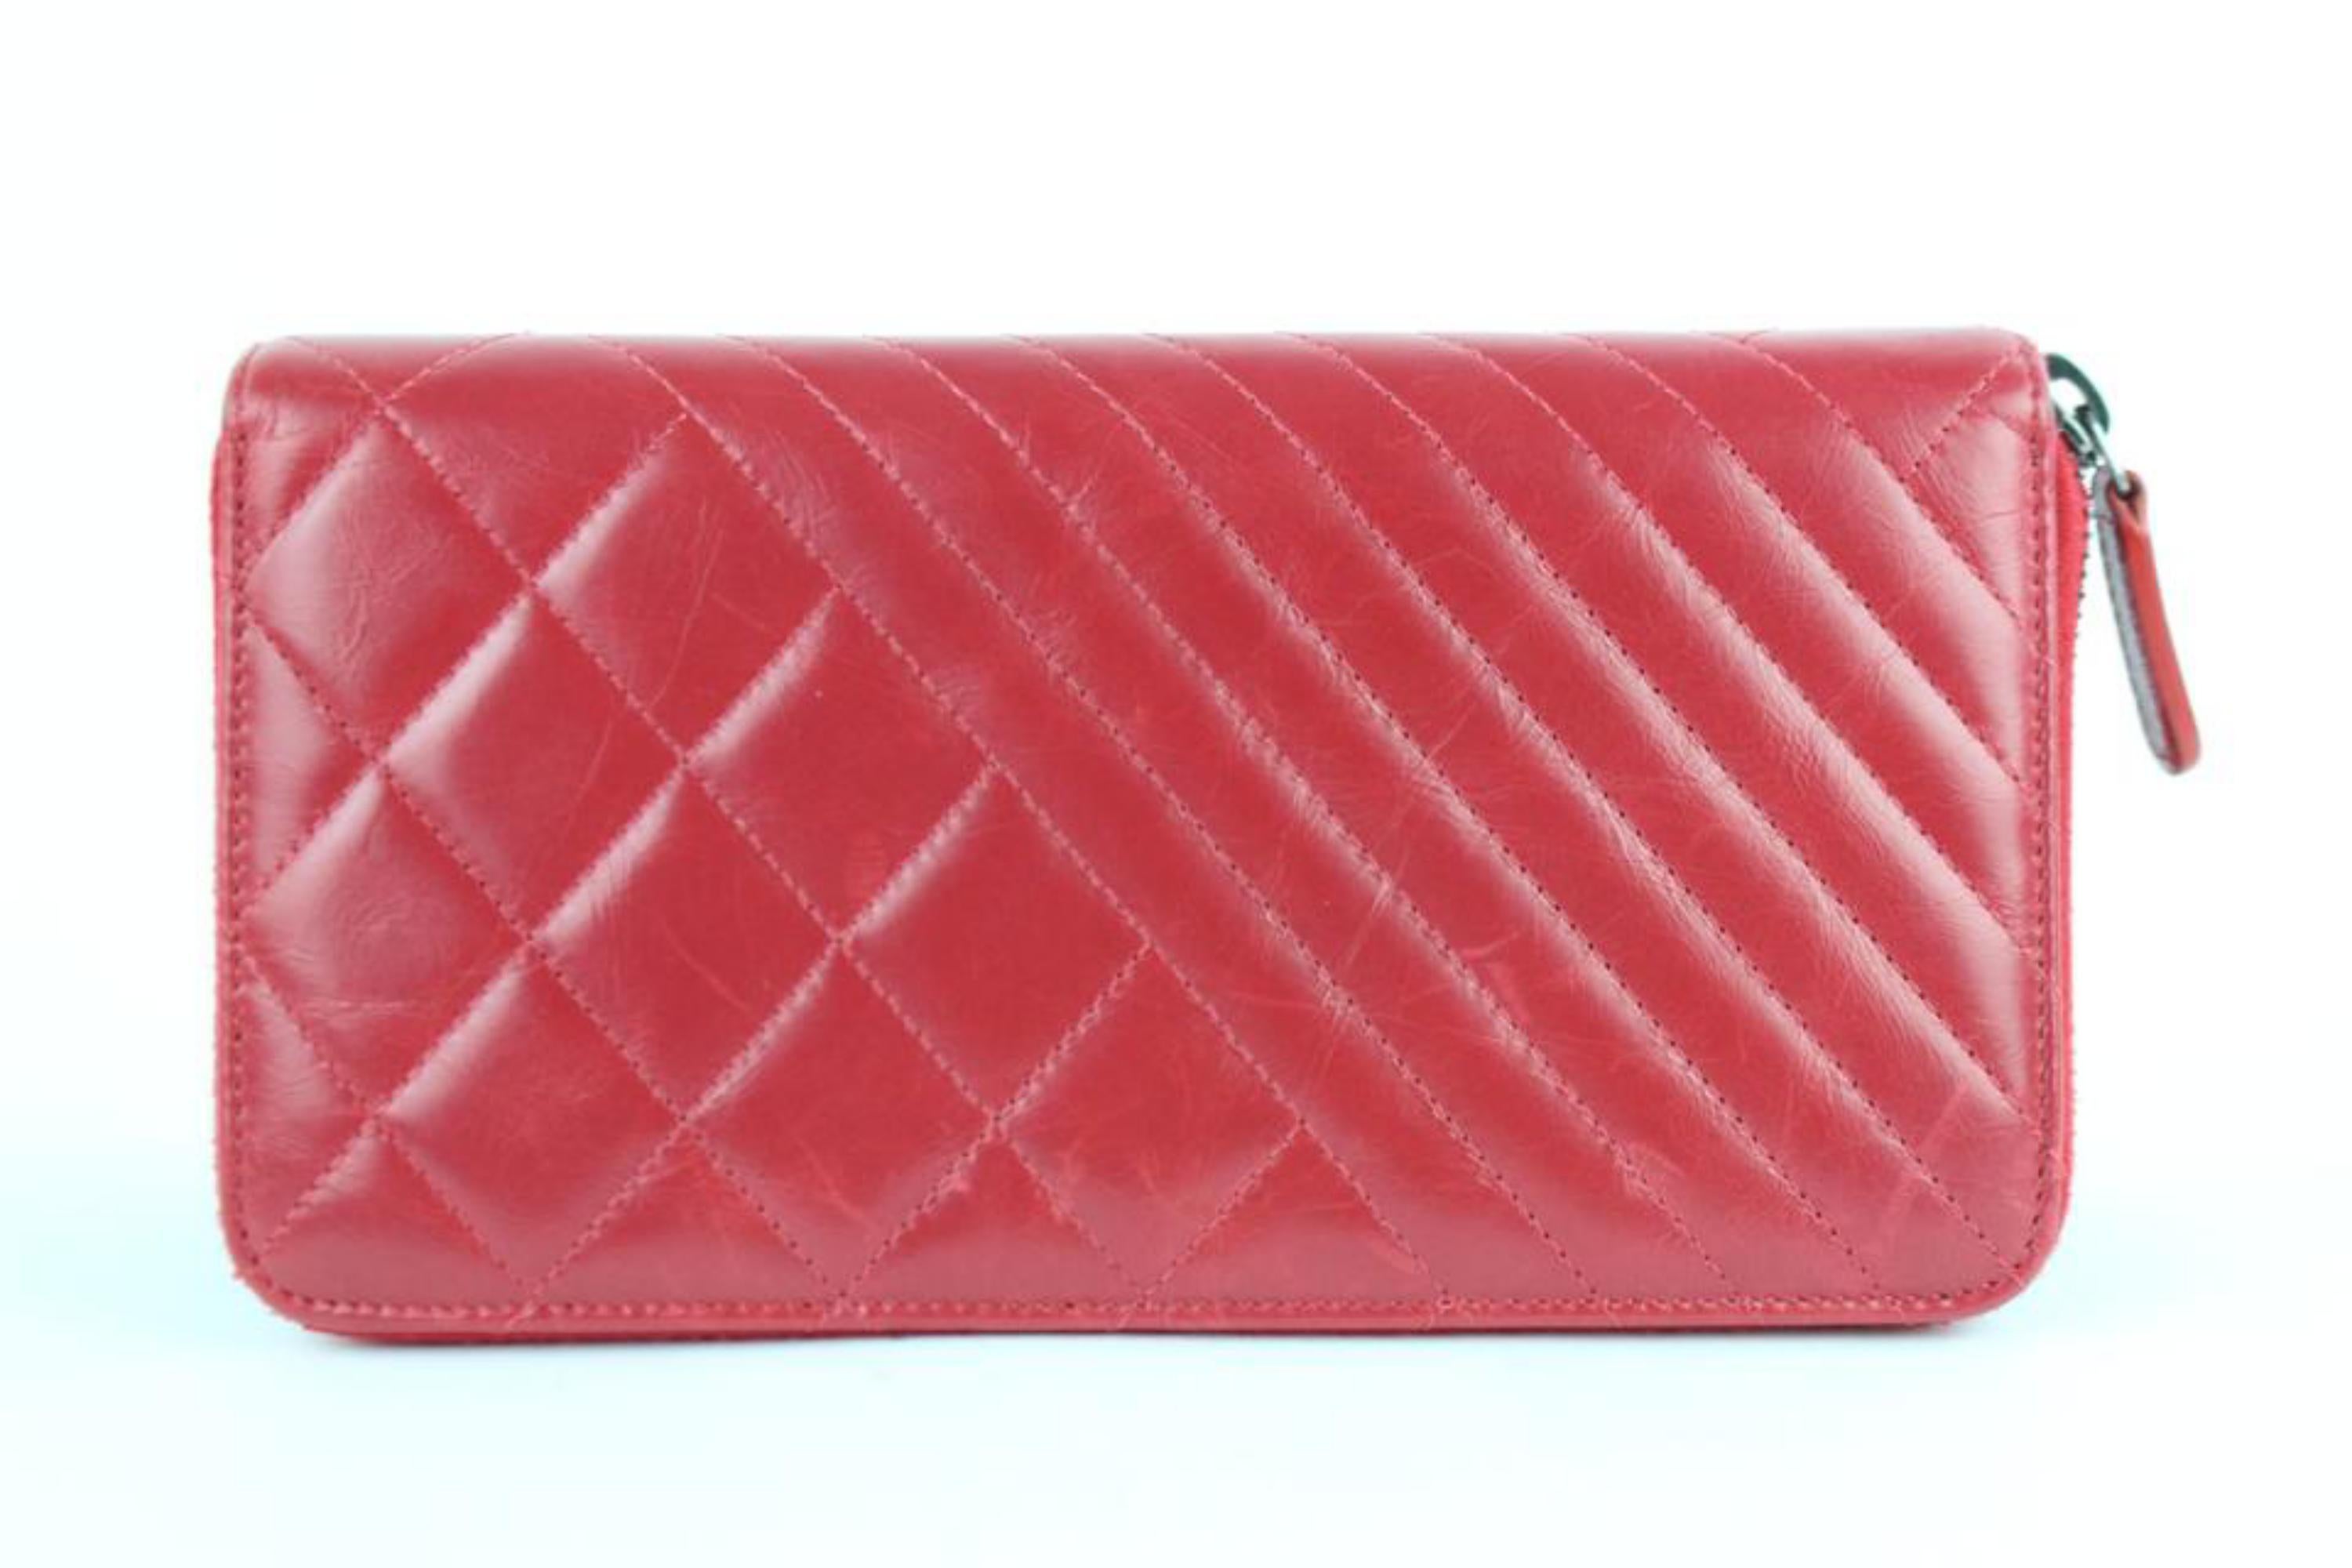 Chanel Zippy Boy Chevron Mix Quilted Zip Around Gusset Wallet 9ce0102 Red clutch For Sale 4